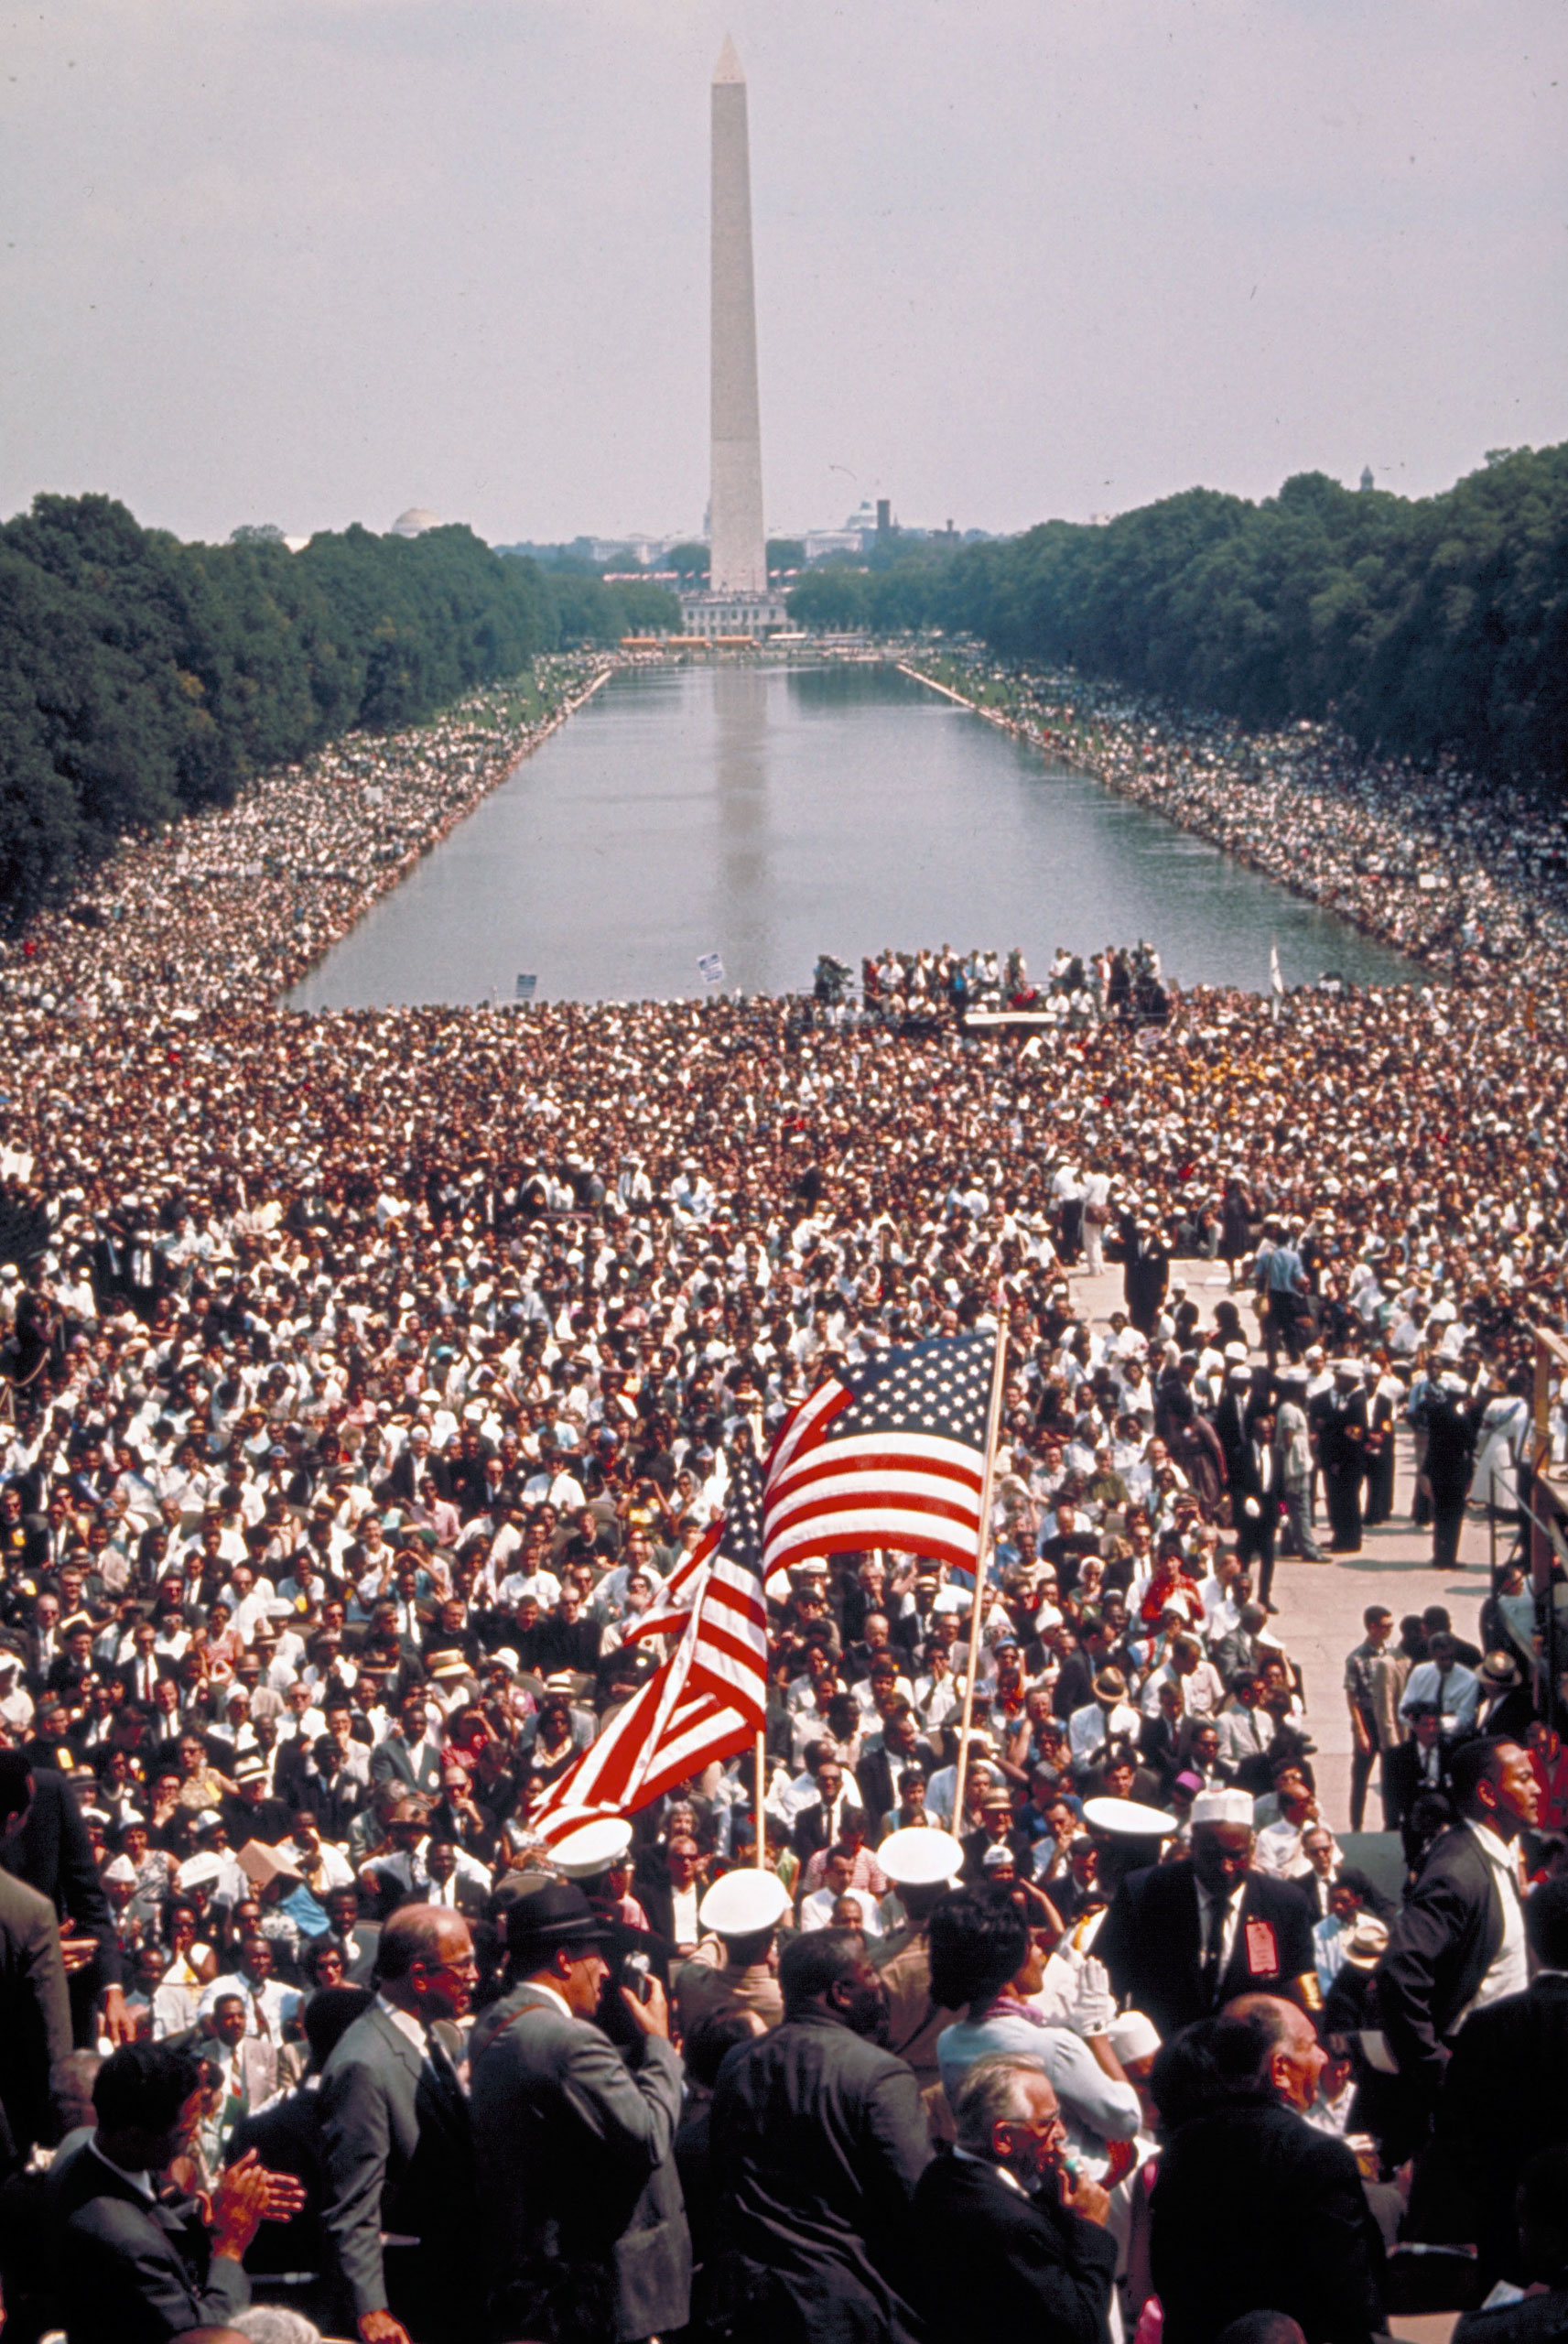 Scene from the March on Washington for Jobs and Freedom, August 28, 1963.